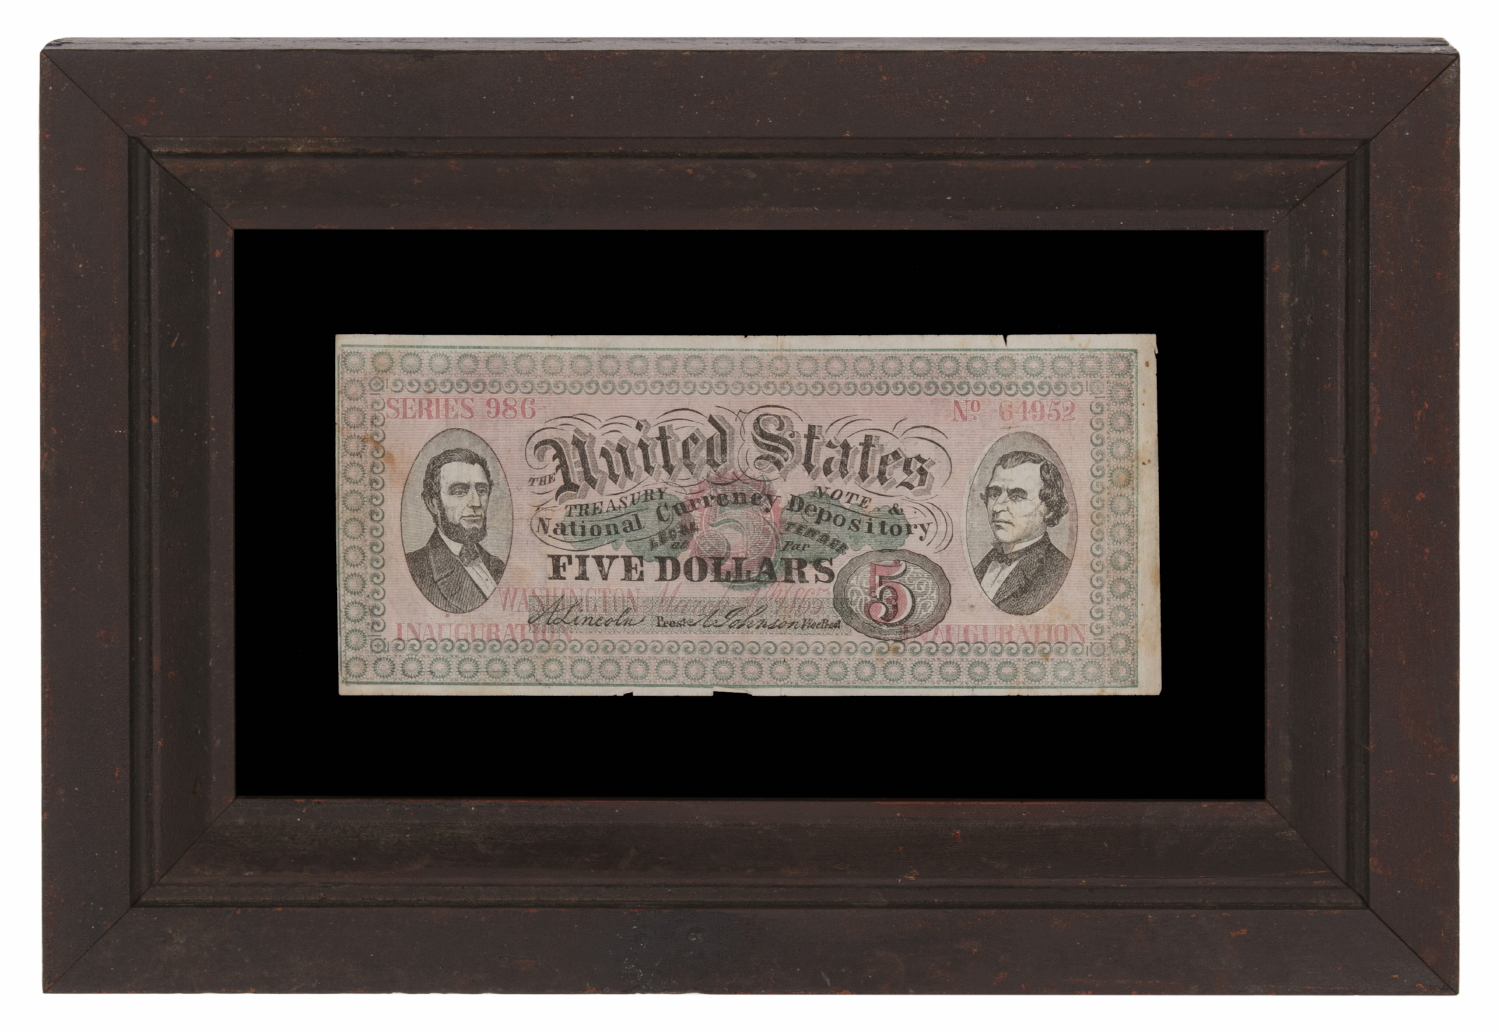 RARE UNITED STATES SANITARY COMMISSION ADVERTISING FLIER, DISTRIBUTED BY J.B. WESTBROOK & CO., NEW YORK CITY, WITH U.S. TREASURY NOTE STYLE IMAGERY FEATURING IMAGES OF ABRAHAM LINCOLN & ANDREW JOHNSON, COMMEMORATING THE 1865 PRESIDENTIAL INAUGURATION